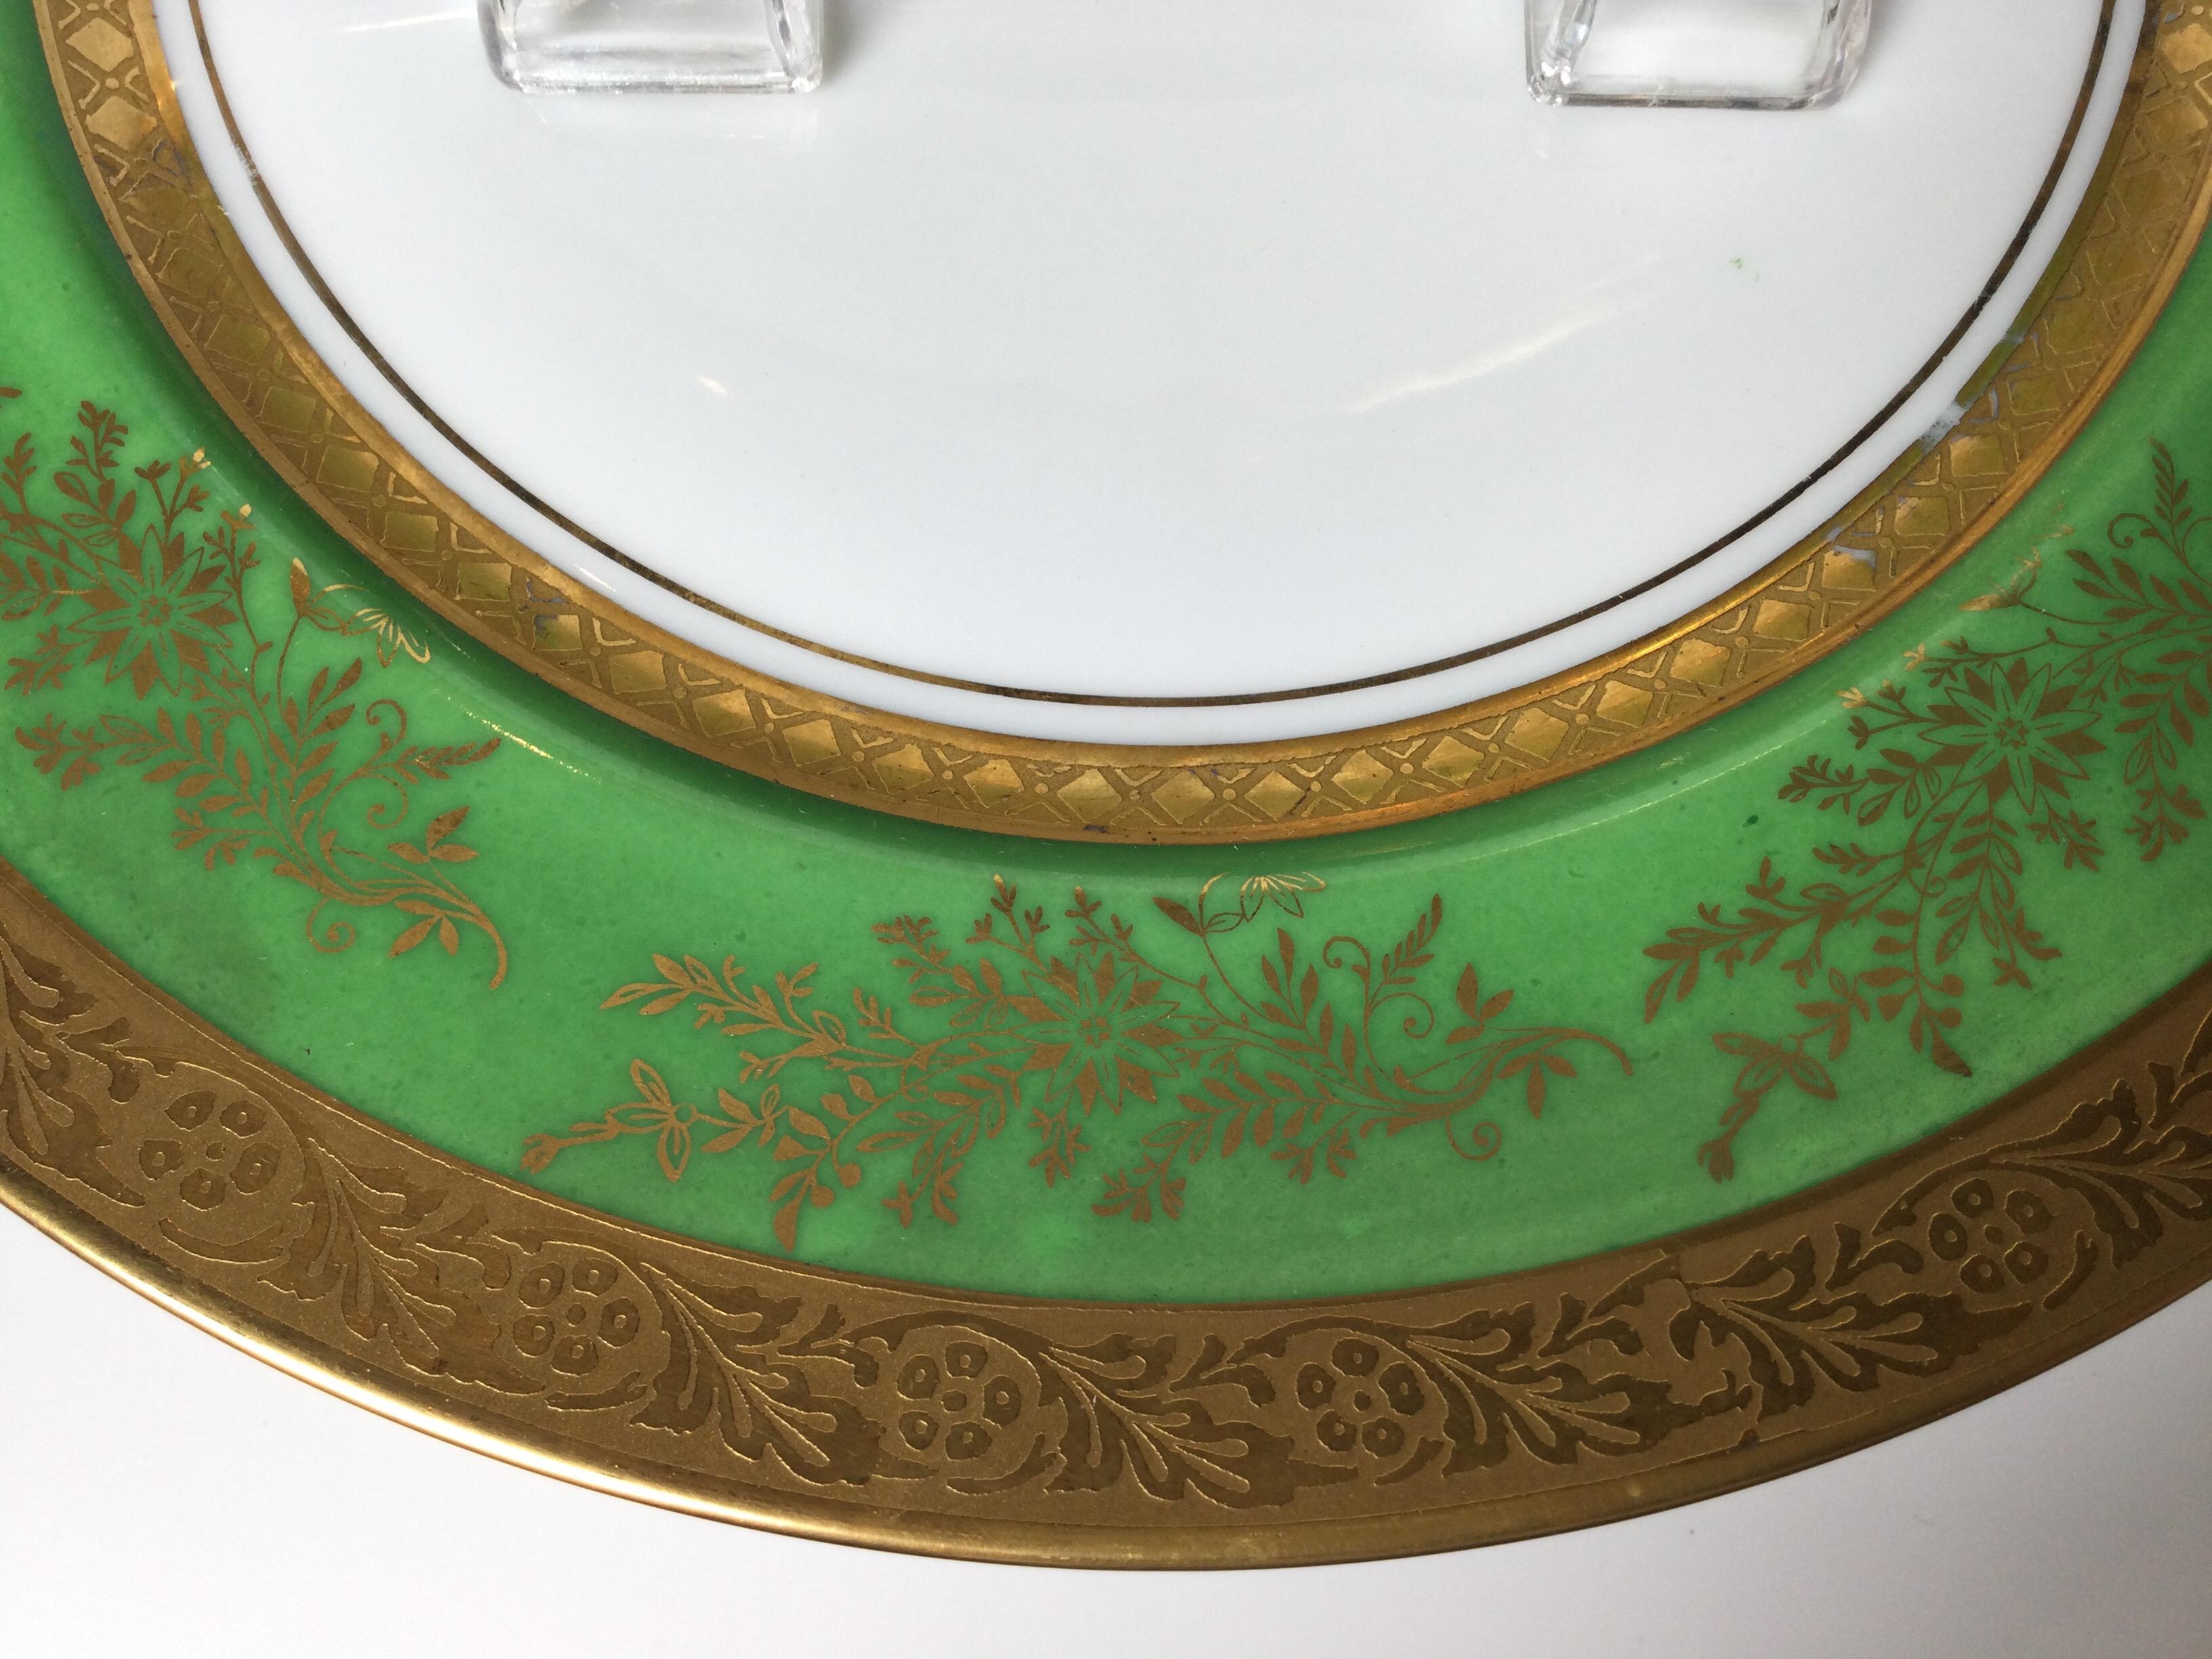 Regal set of 8 gold and apple green bordered service plates. The circular gold bands with apple green background with gilt branch decoration. Porcelain, Germany, mid-20th century. Measure: 10.75 diameter.